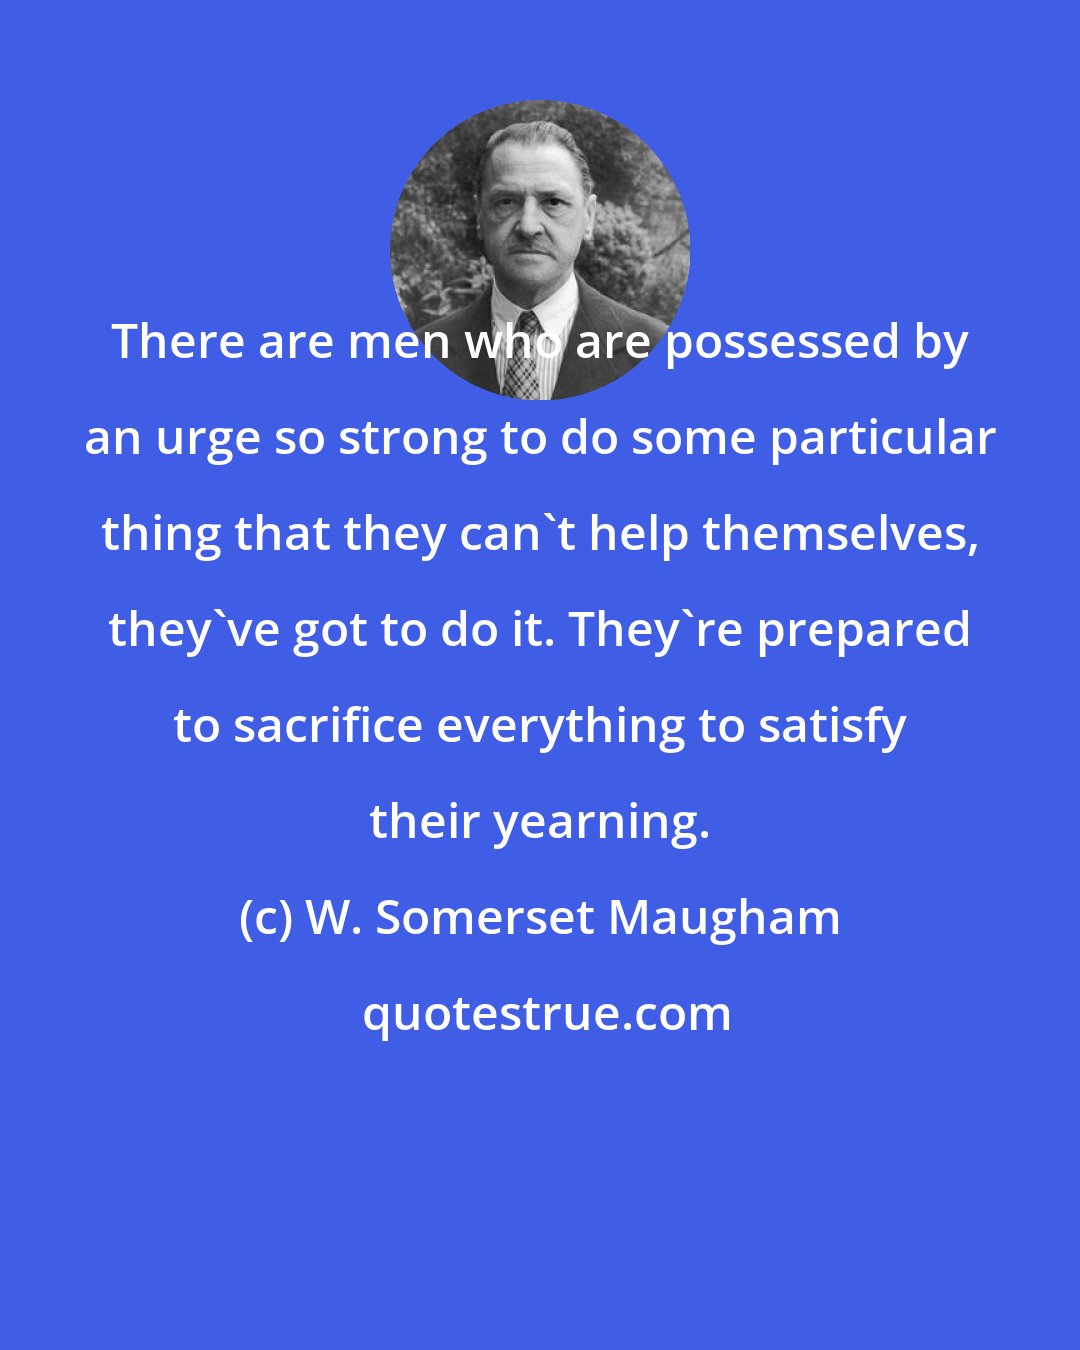 W. Somerset Maugham: There are men who are possessed by an urge so strong to do some particular thing that they can't help themselves, they've got to do it. They're prepared to sacrifice everything to satisfy their yearning.